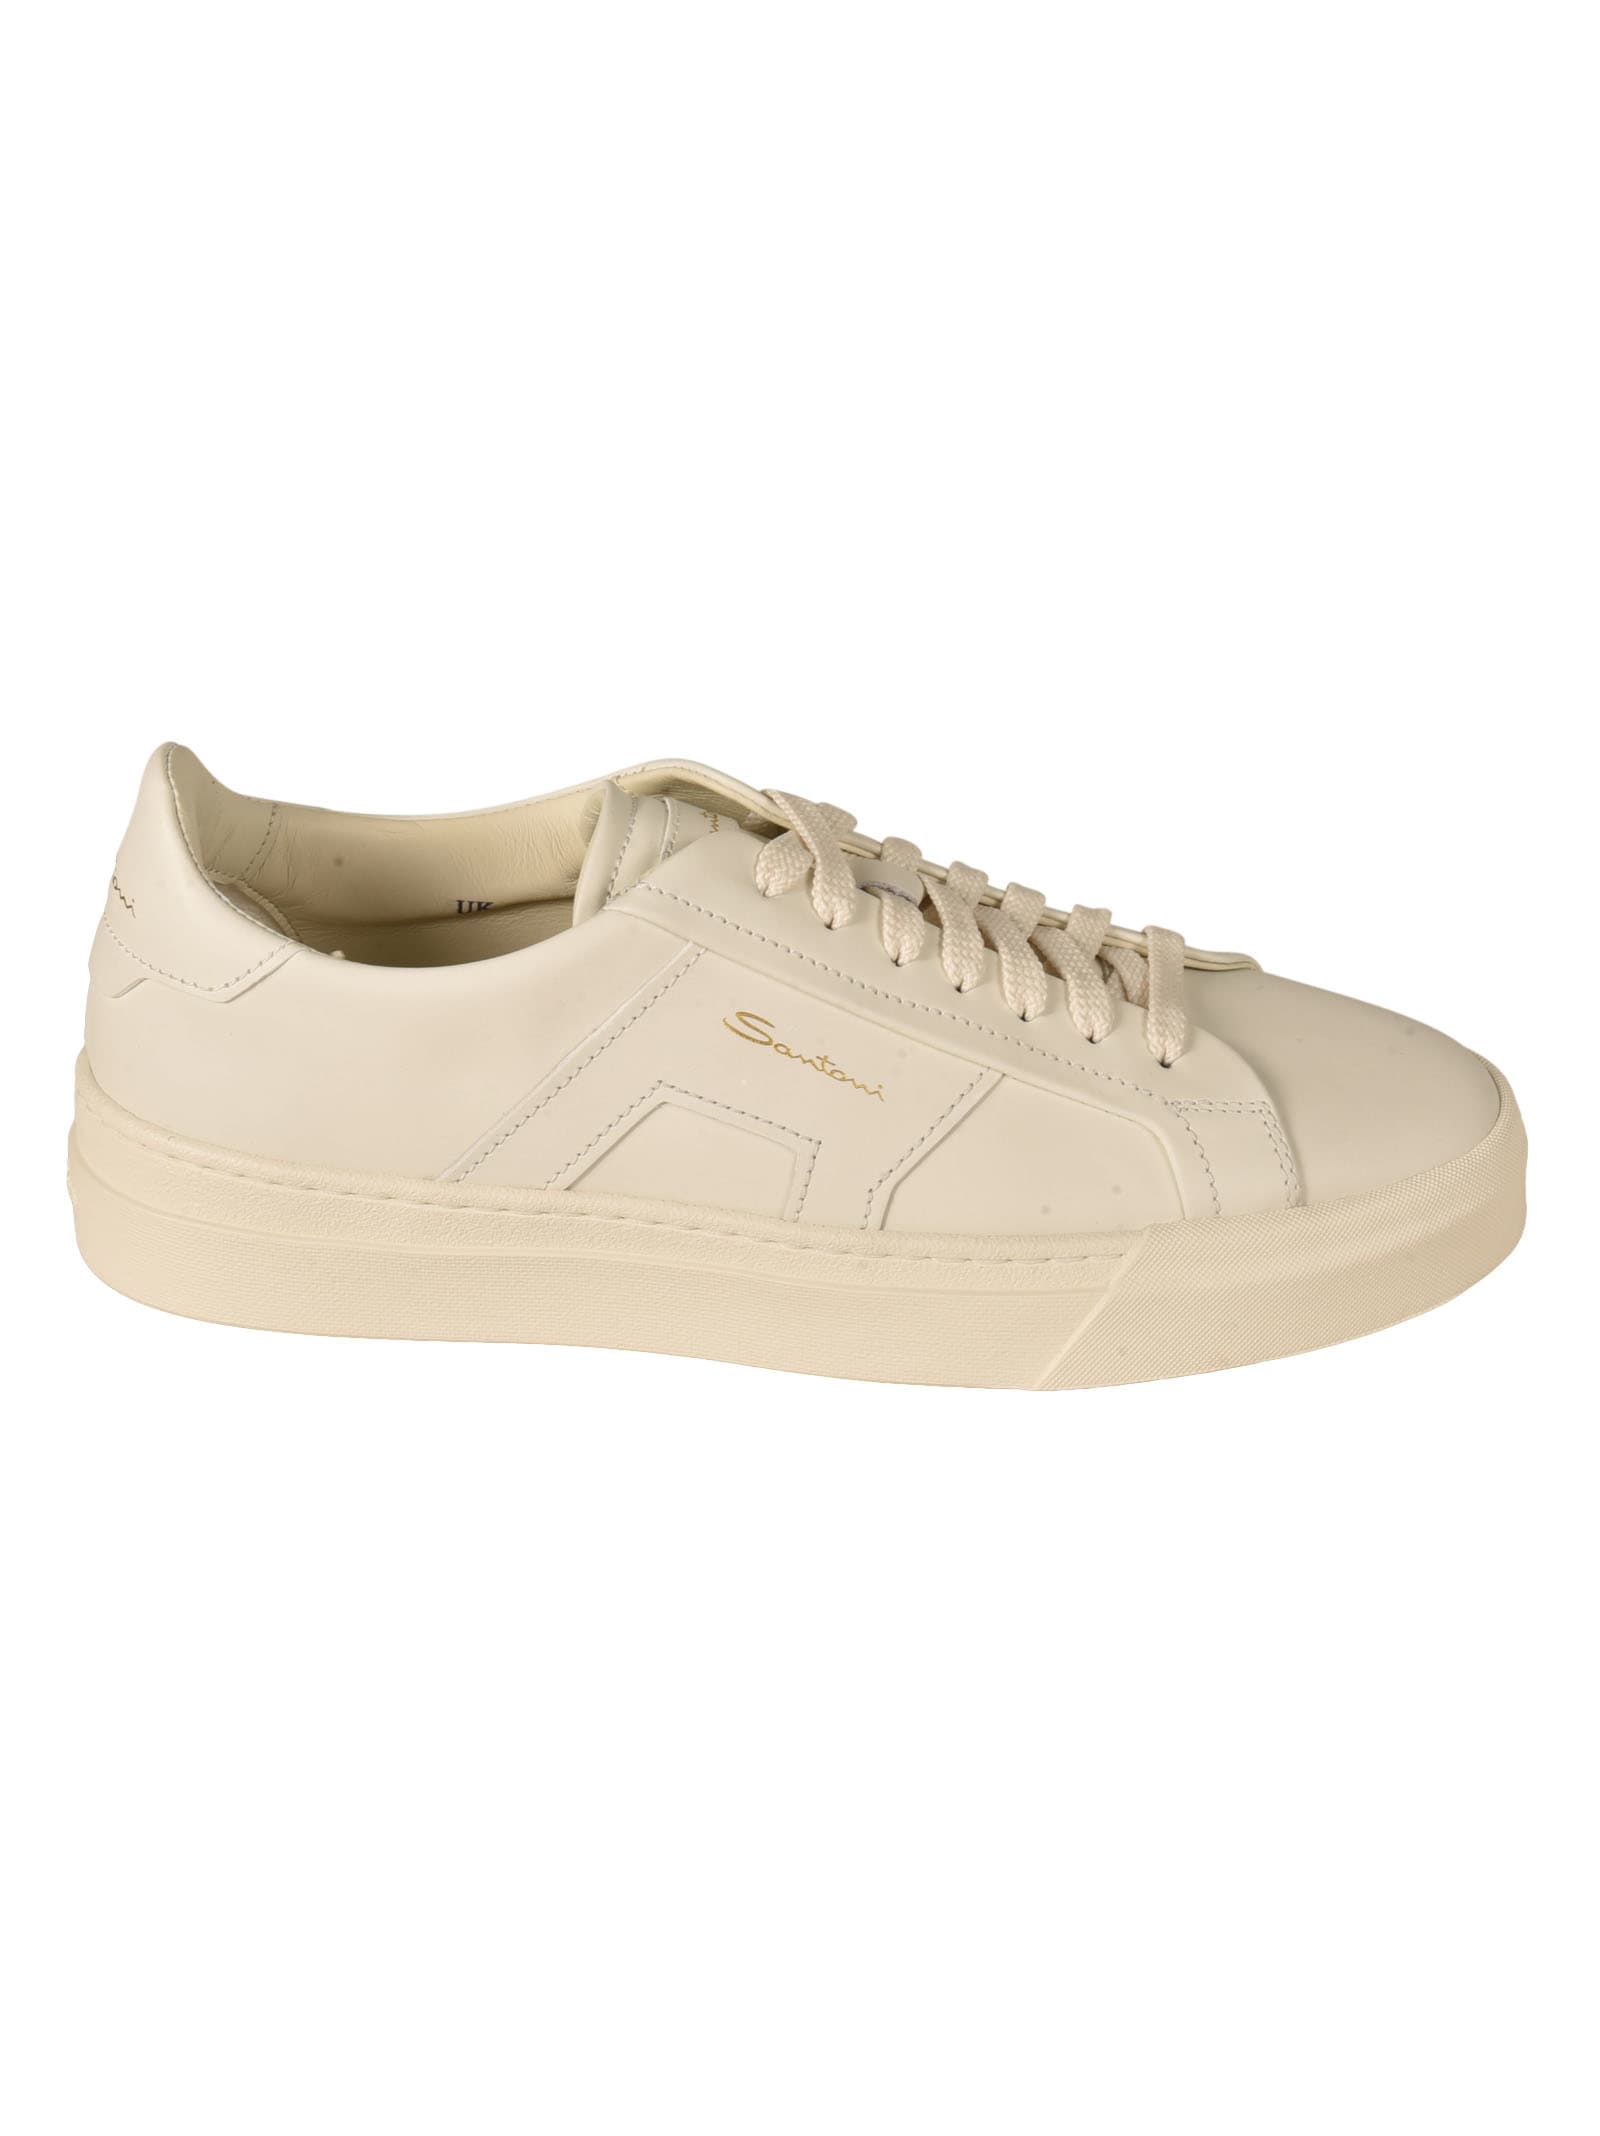 Santoni Logo Sided Classic Trainers In White